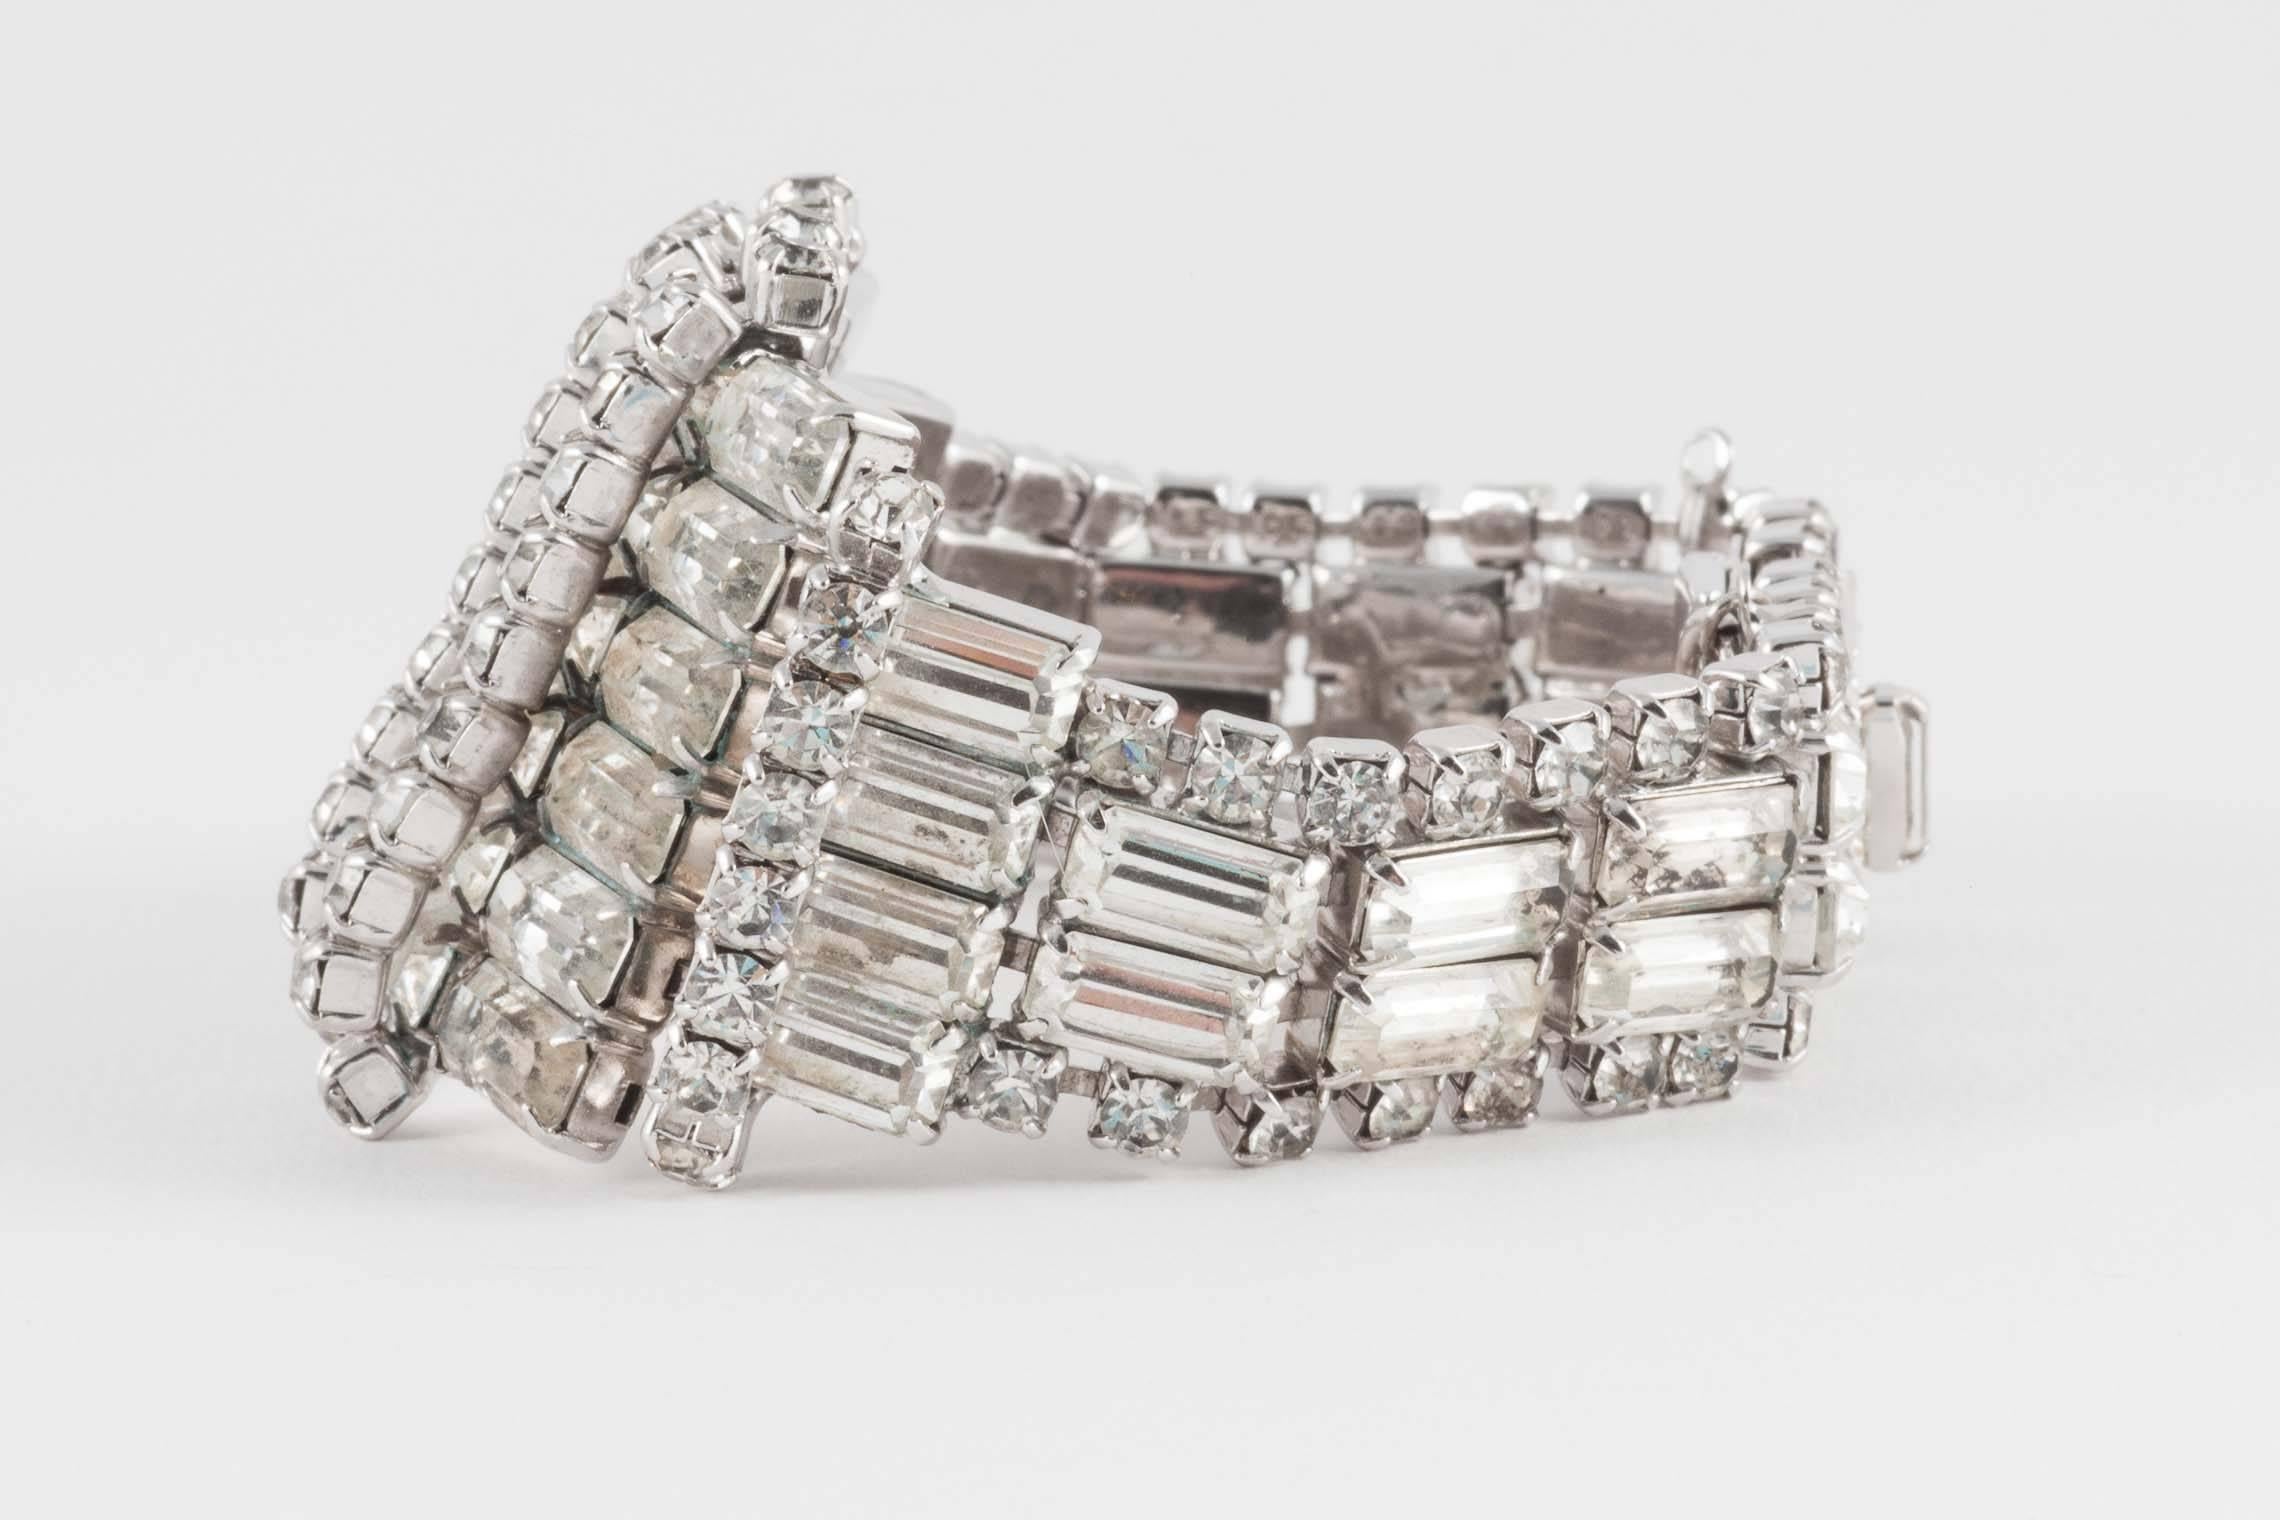 This wonderfully designed bracelet makes a strong statement. Probably designed to be worn over gloves, it is a good size for even a bigger wrist, and is ready for the party season. It has a working safety chain so you won't lose it!